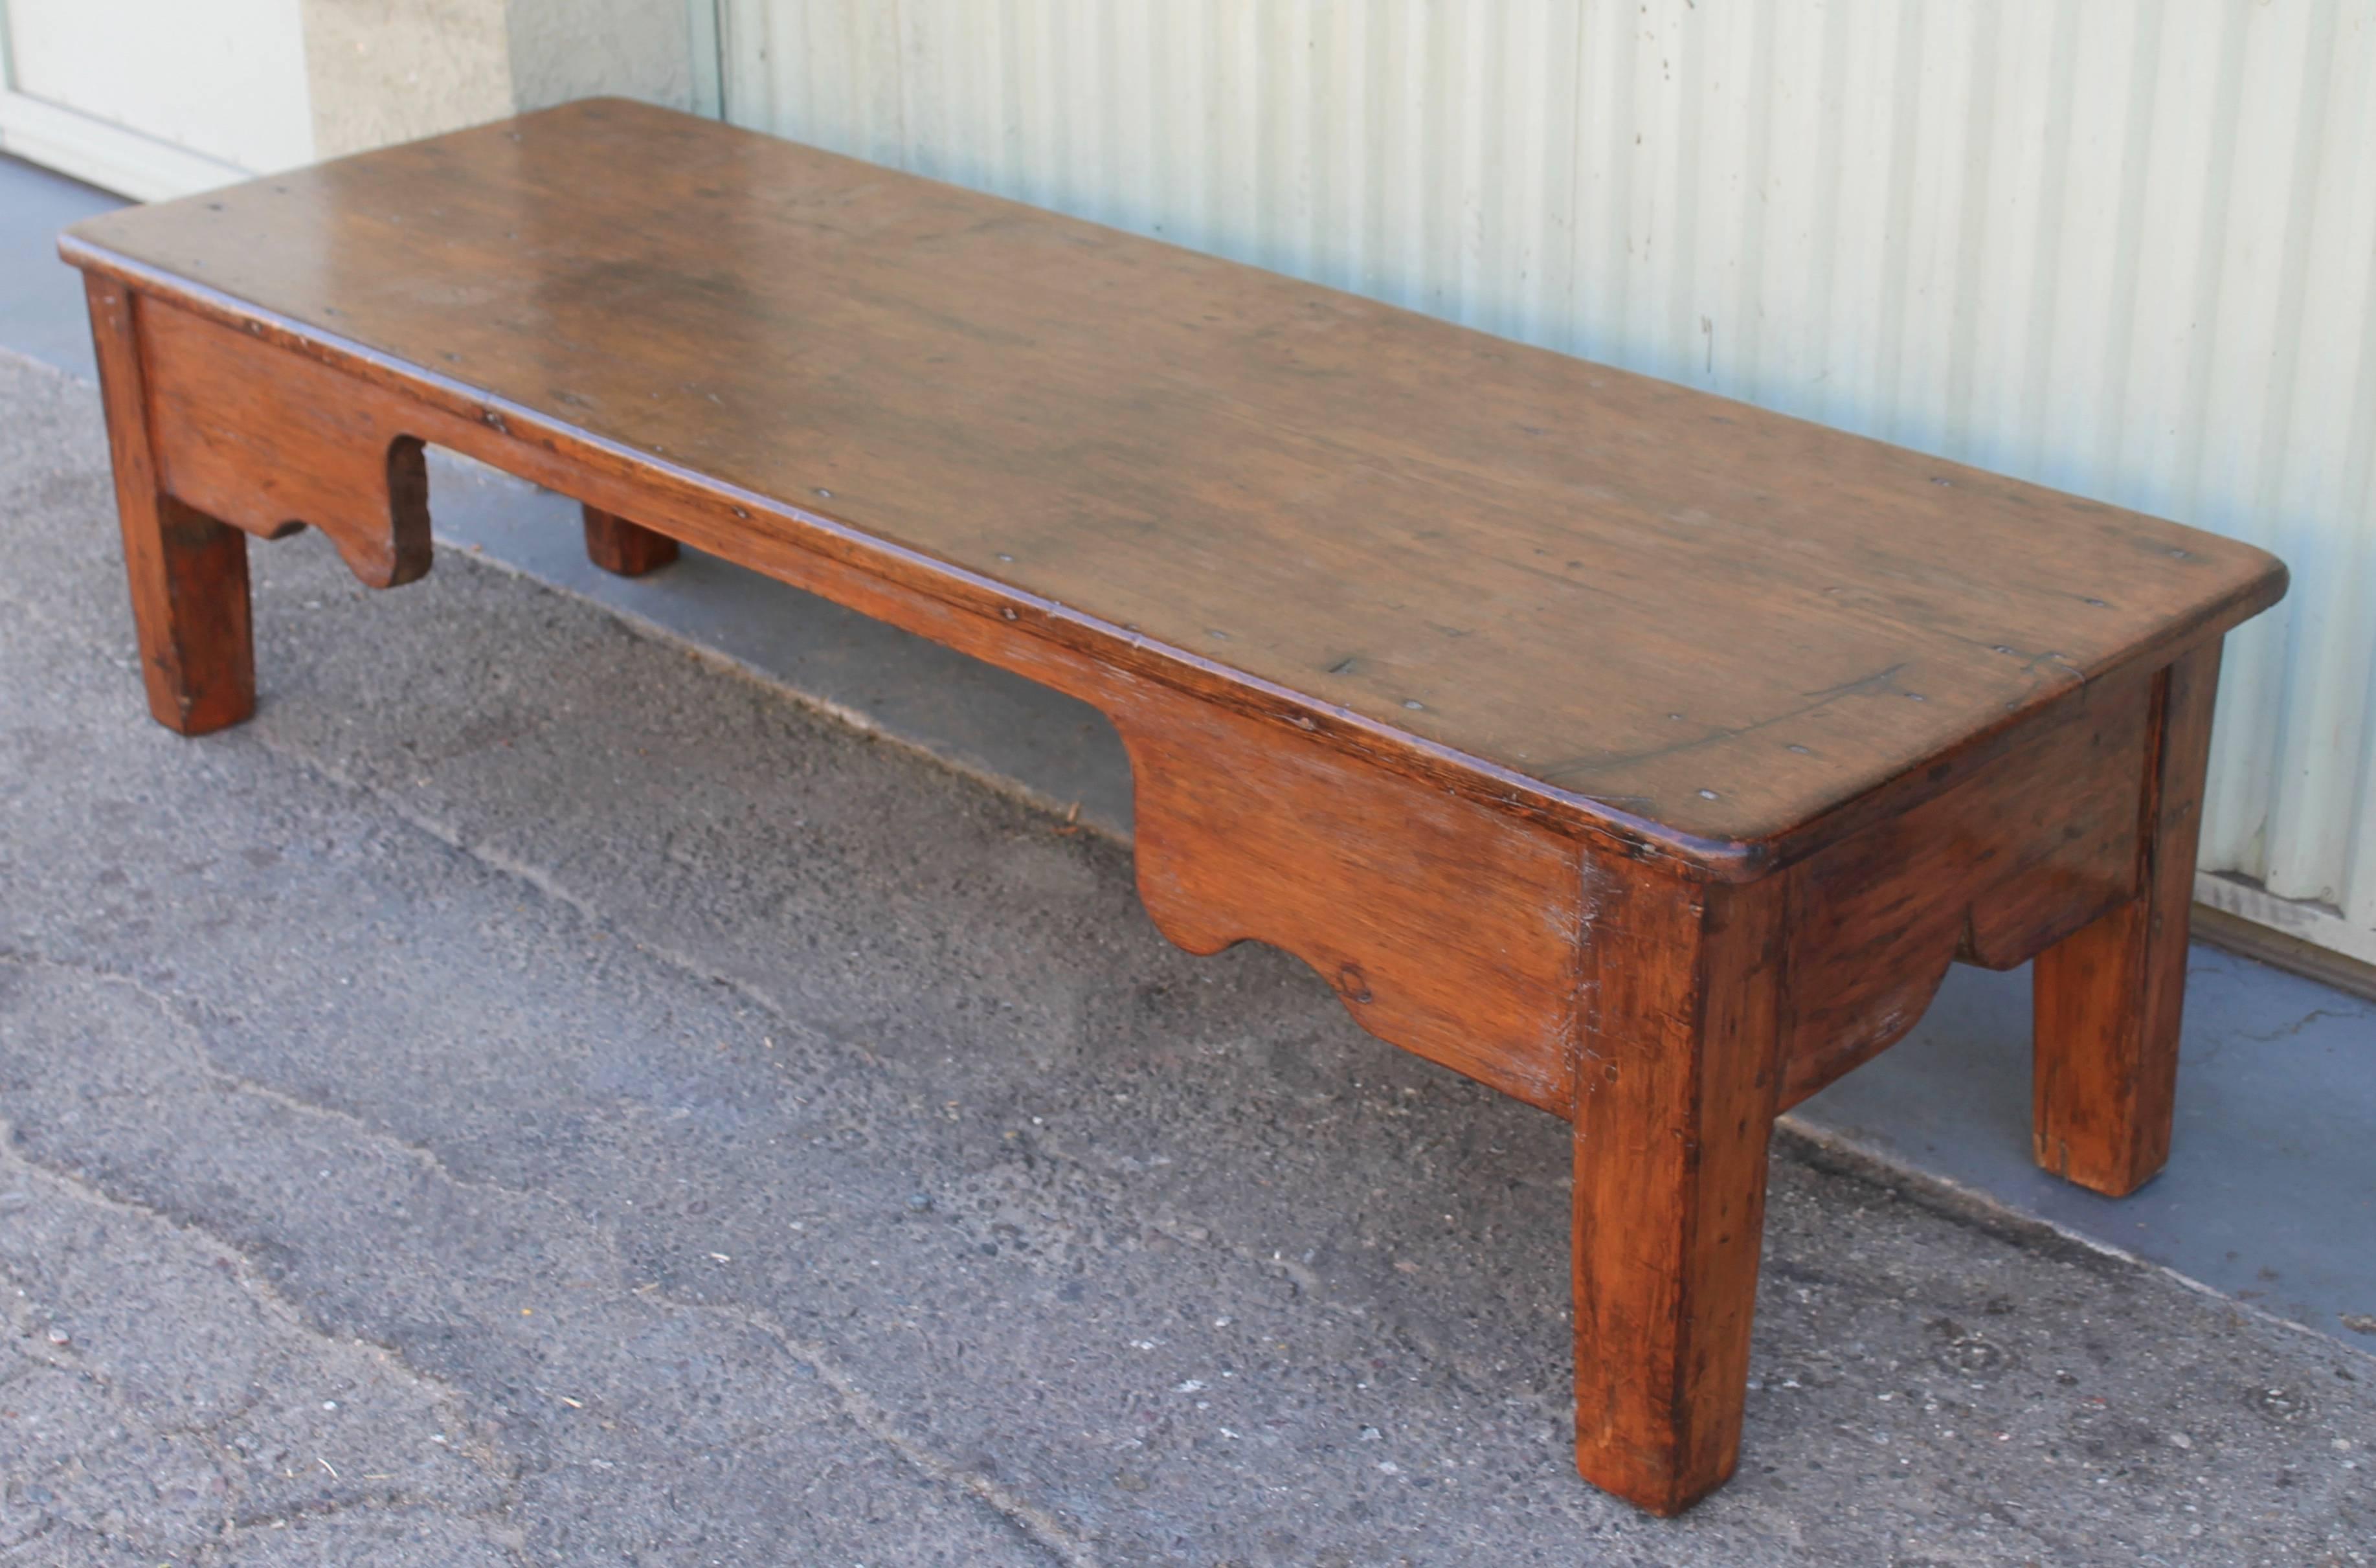 This is the most amazing large coffee table ever. It was a six foot long farm table at on time and now a wonderful Americana coffee table. It is made from wide pine plank boards and large hand cut square nails. The feet are square and thick. This